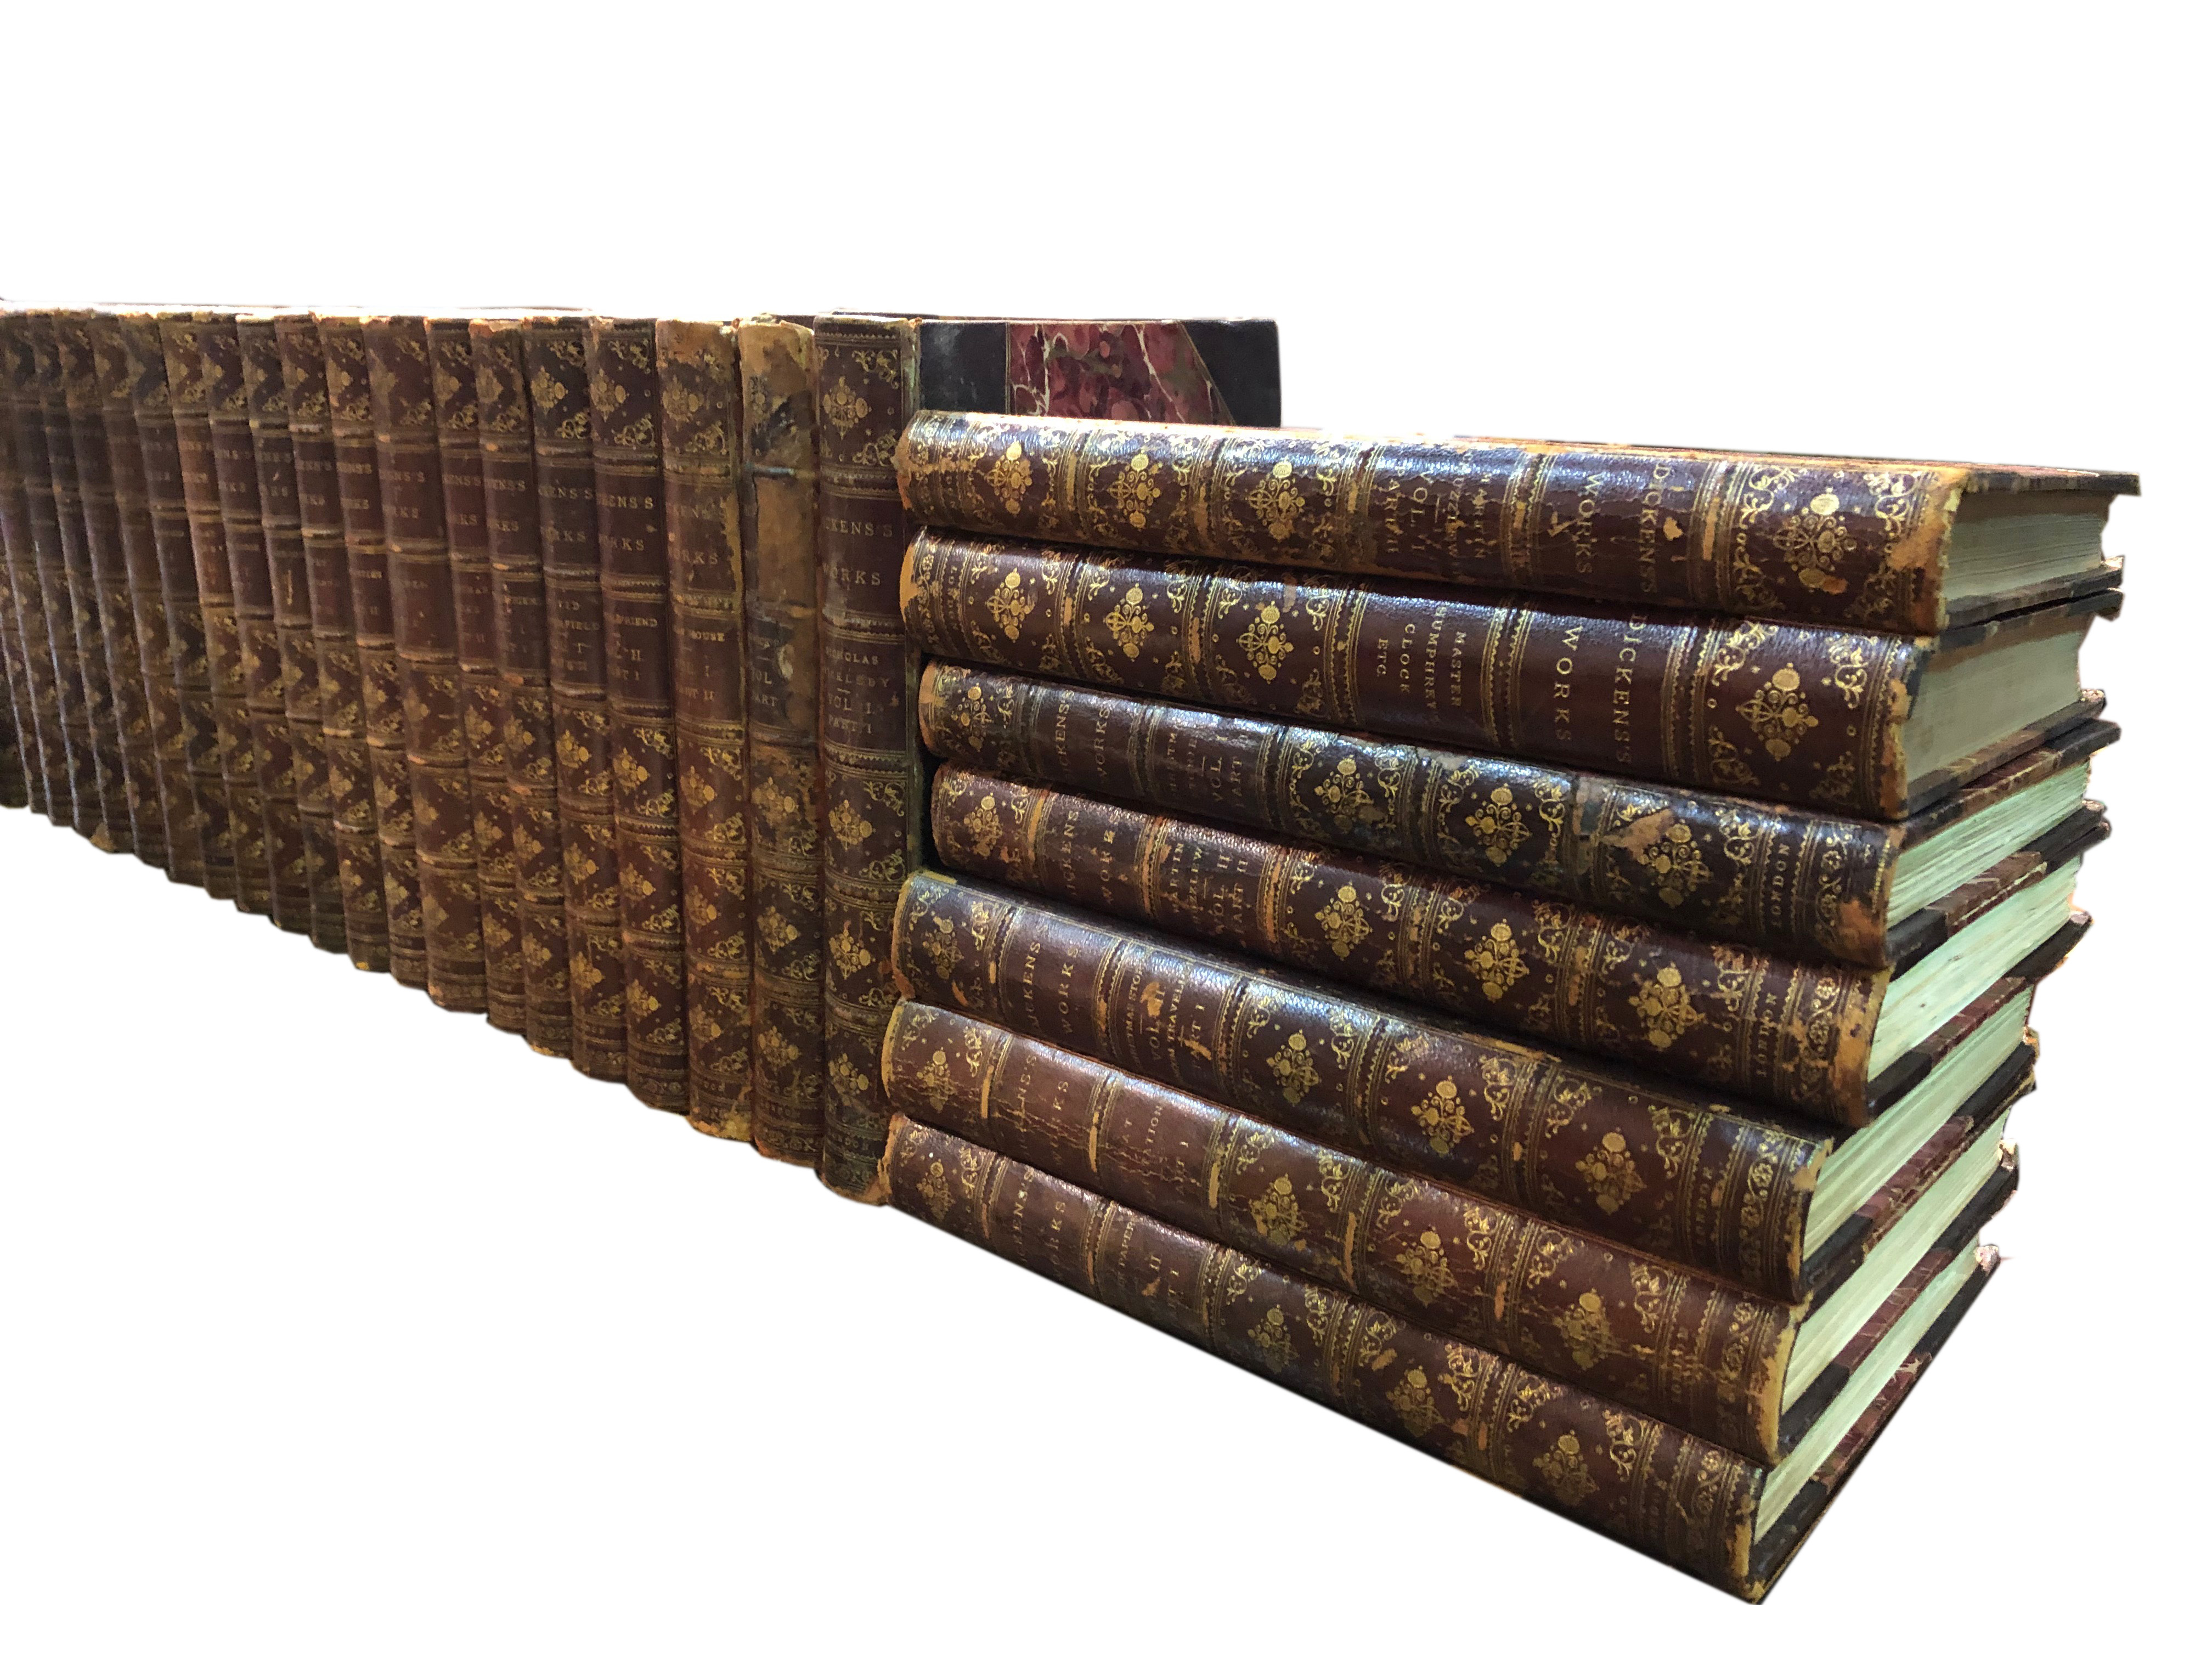 A 19th Century Collection of 60 Illustrated Volumes of Charles Dickens' Works No. 4785